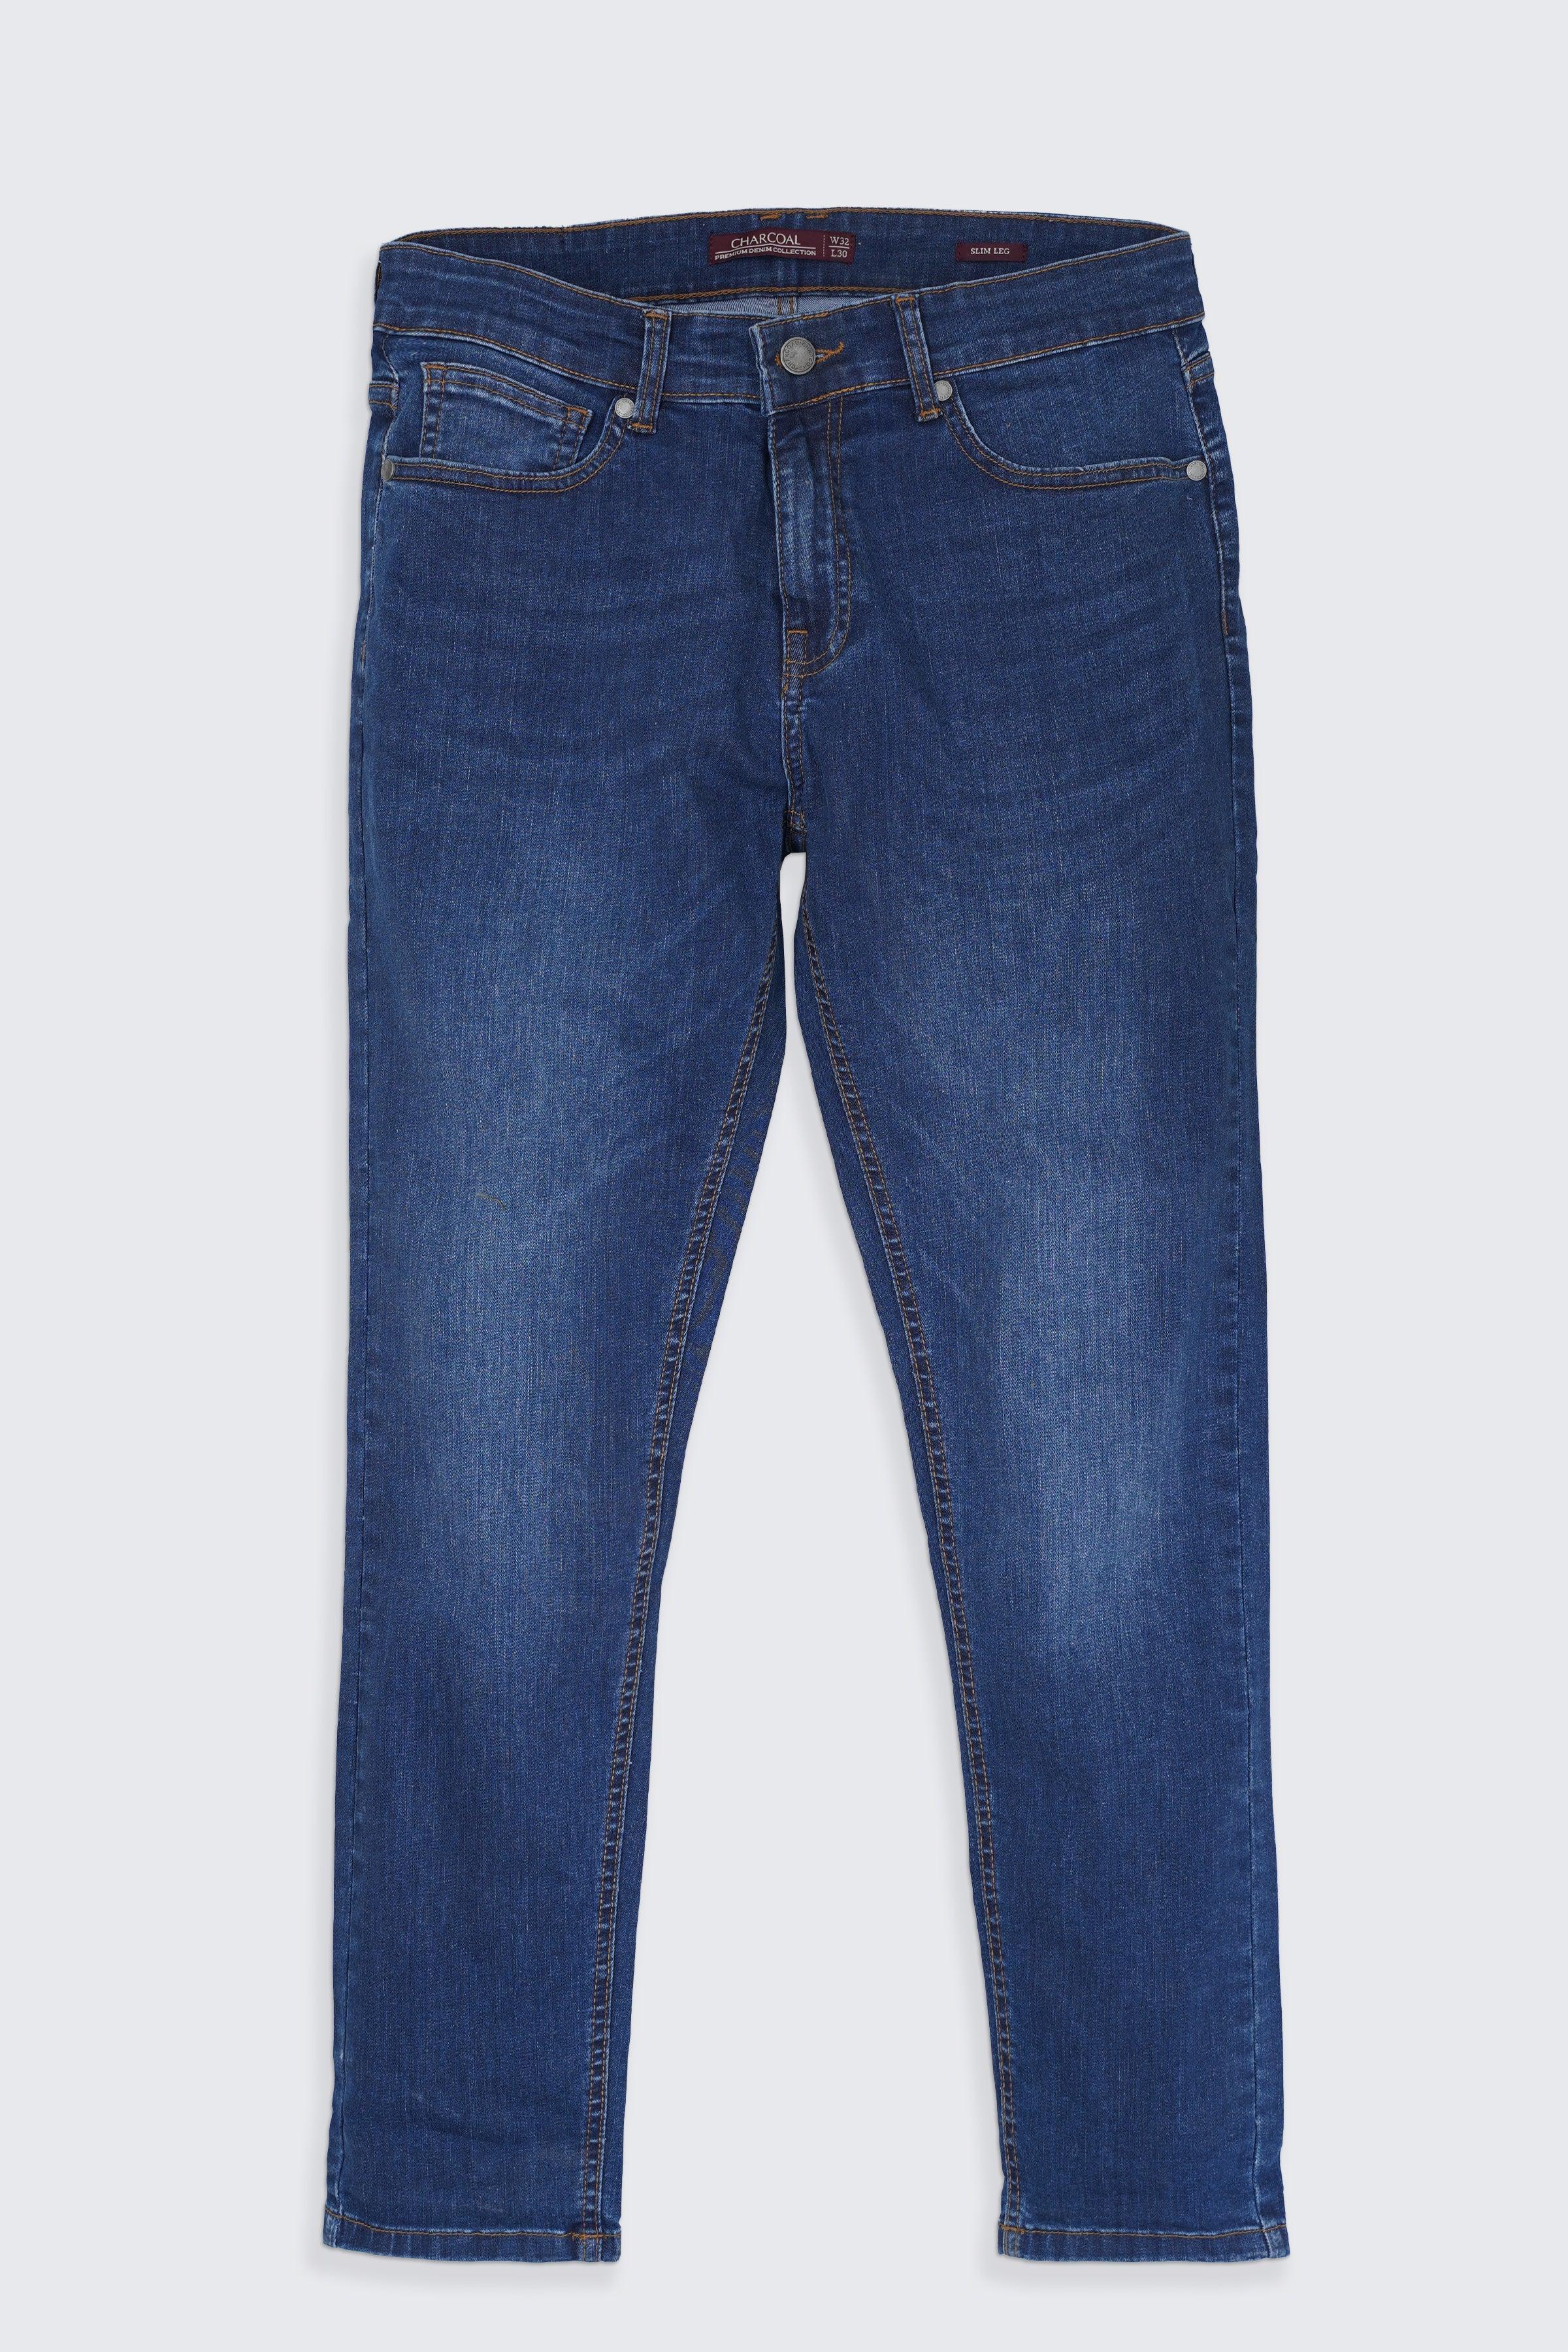 SLIM FIT LEG JEANS DARK BLUE at Charcoal Clothing